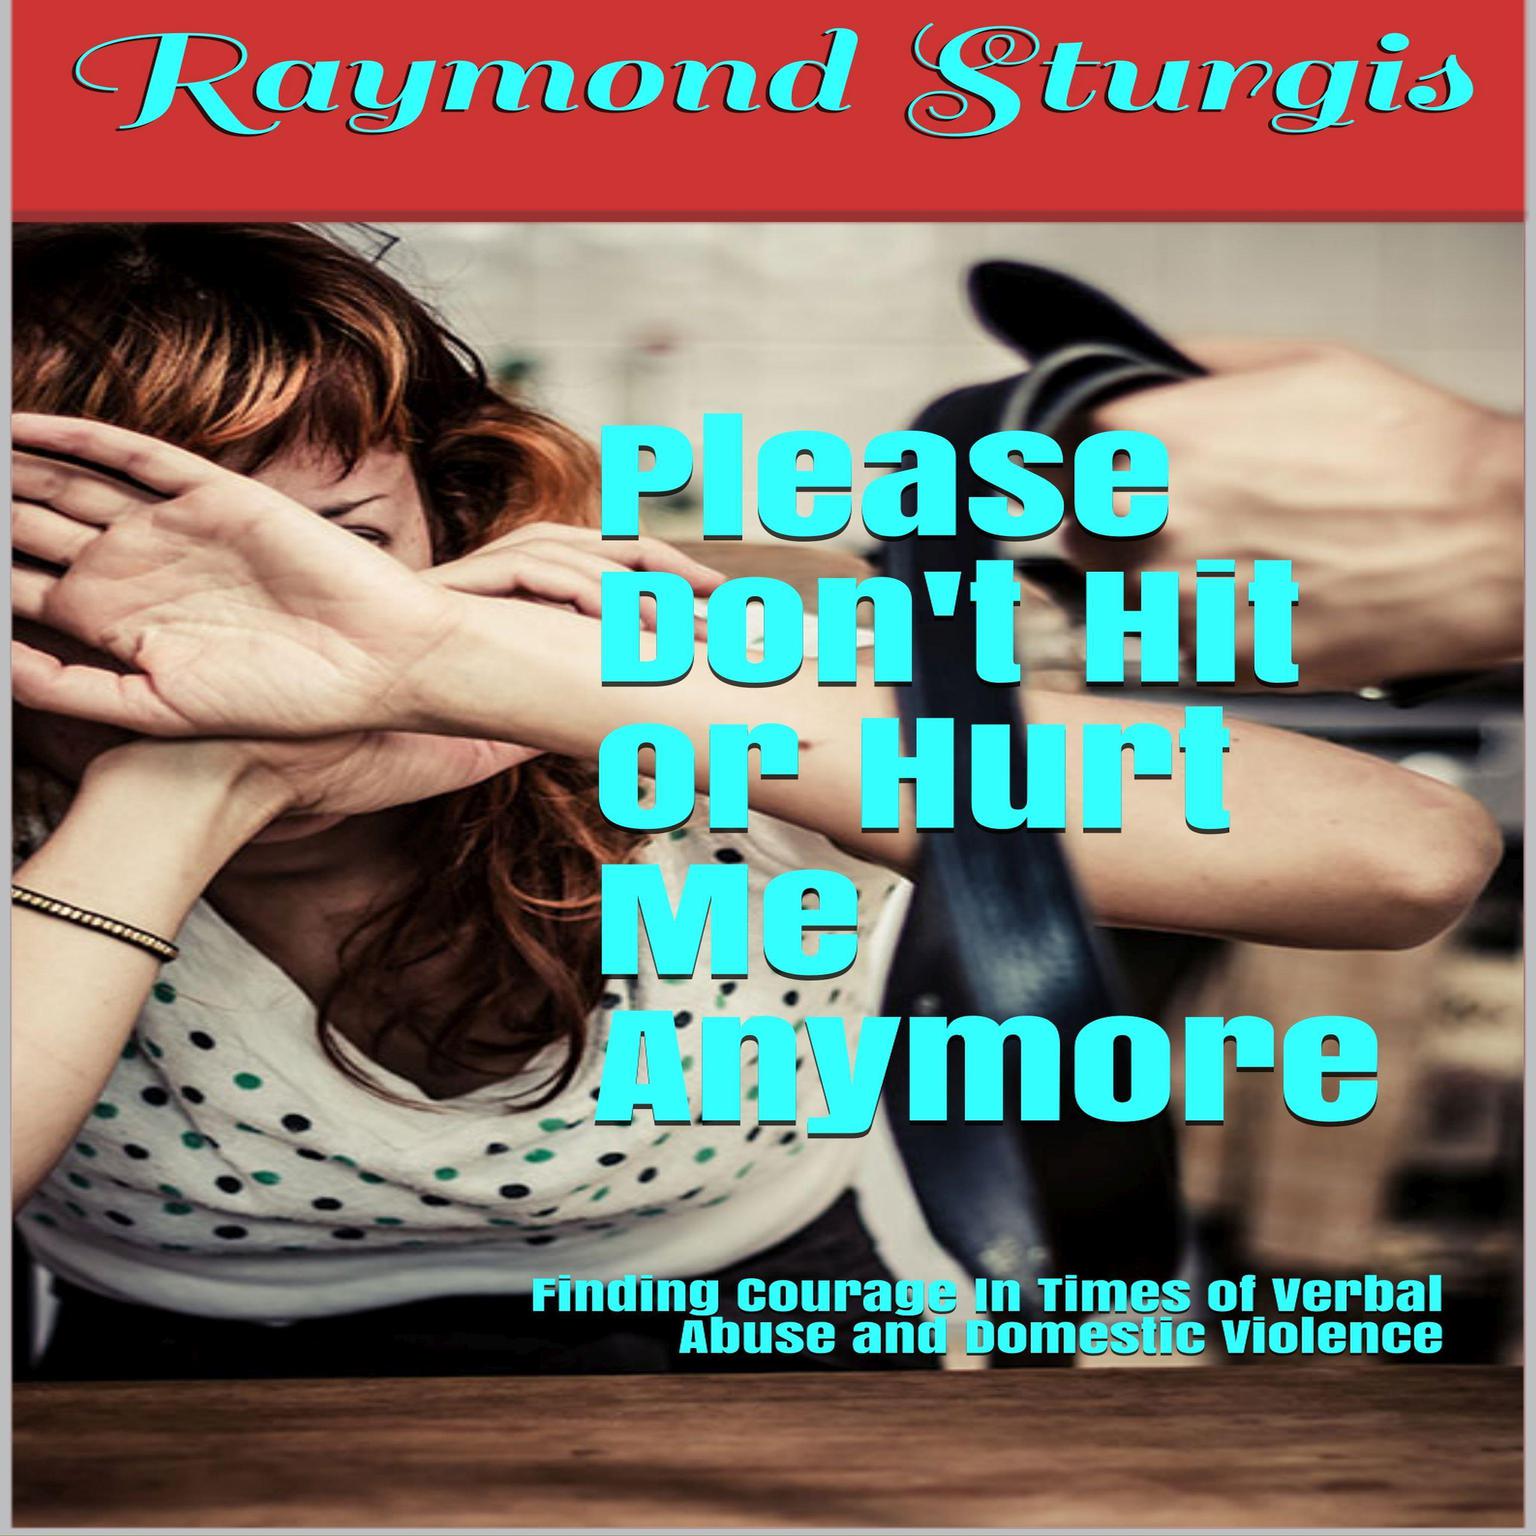 Please Dont Hit or Hurt Me Anymore!: Finding Courage In Times of Verbal Abuse and Violence: Finding Courage in Times of Verbal Abuse and Violence Audiobook, by Raymond Sturgis